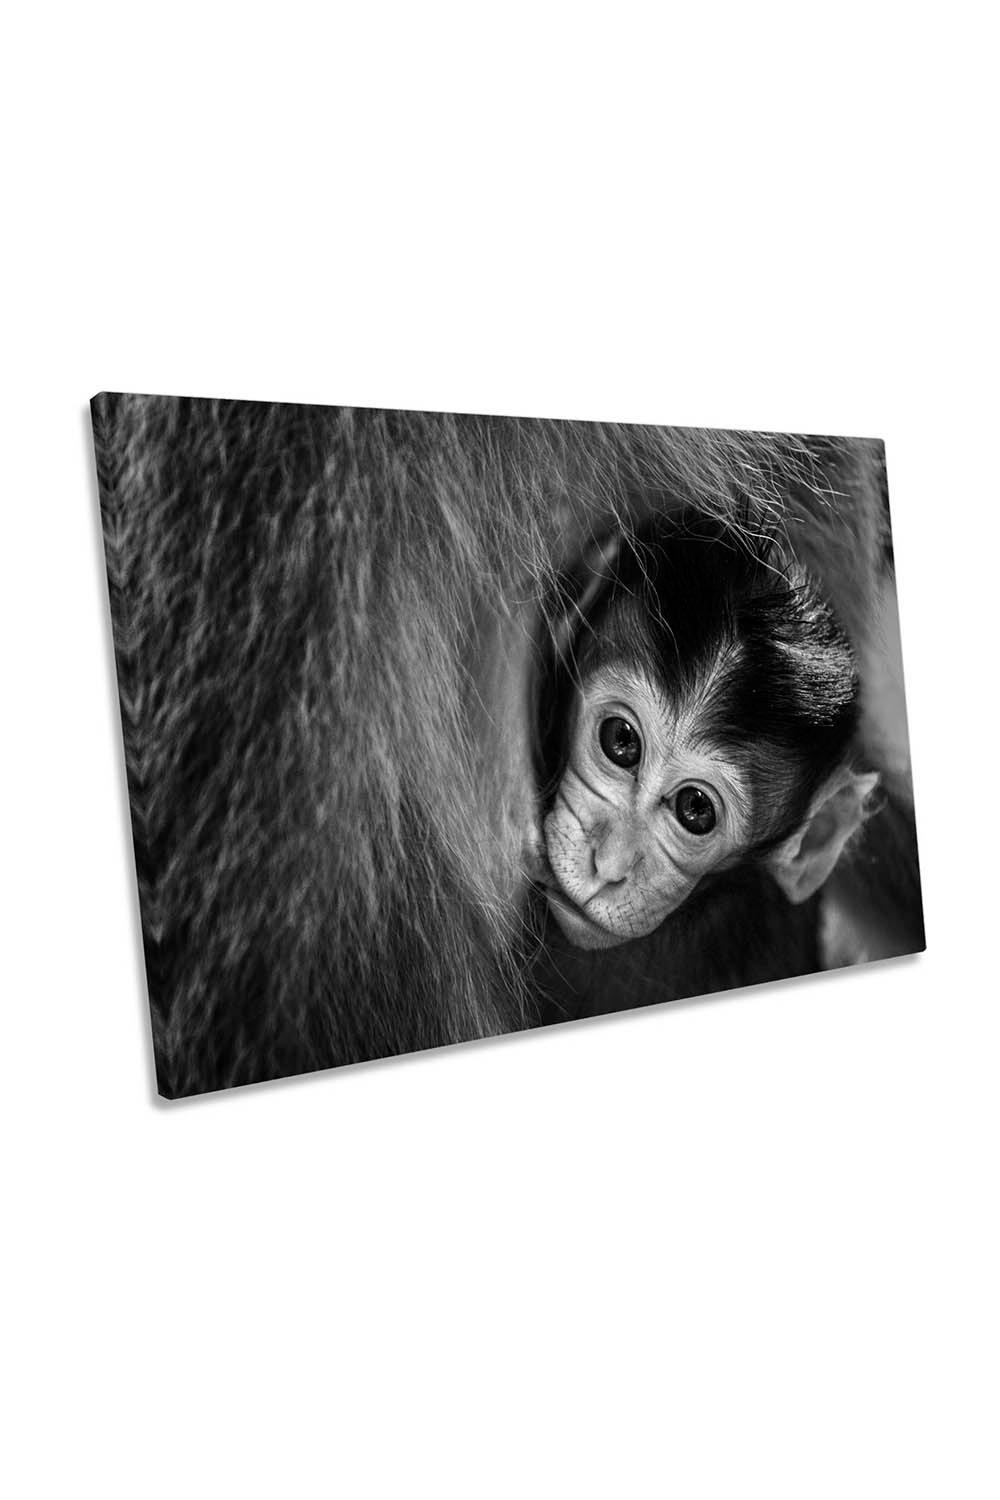 A Mother's Love Monkey Canvas Wall Art Picture Print